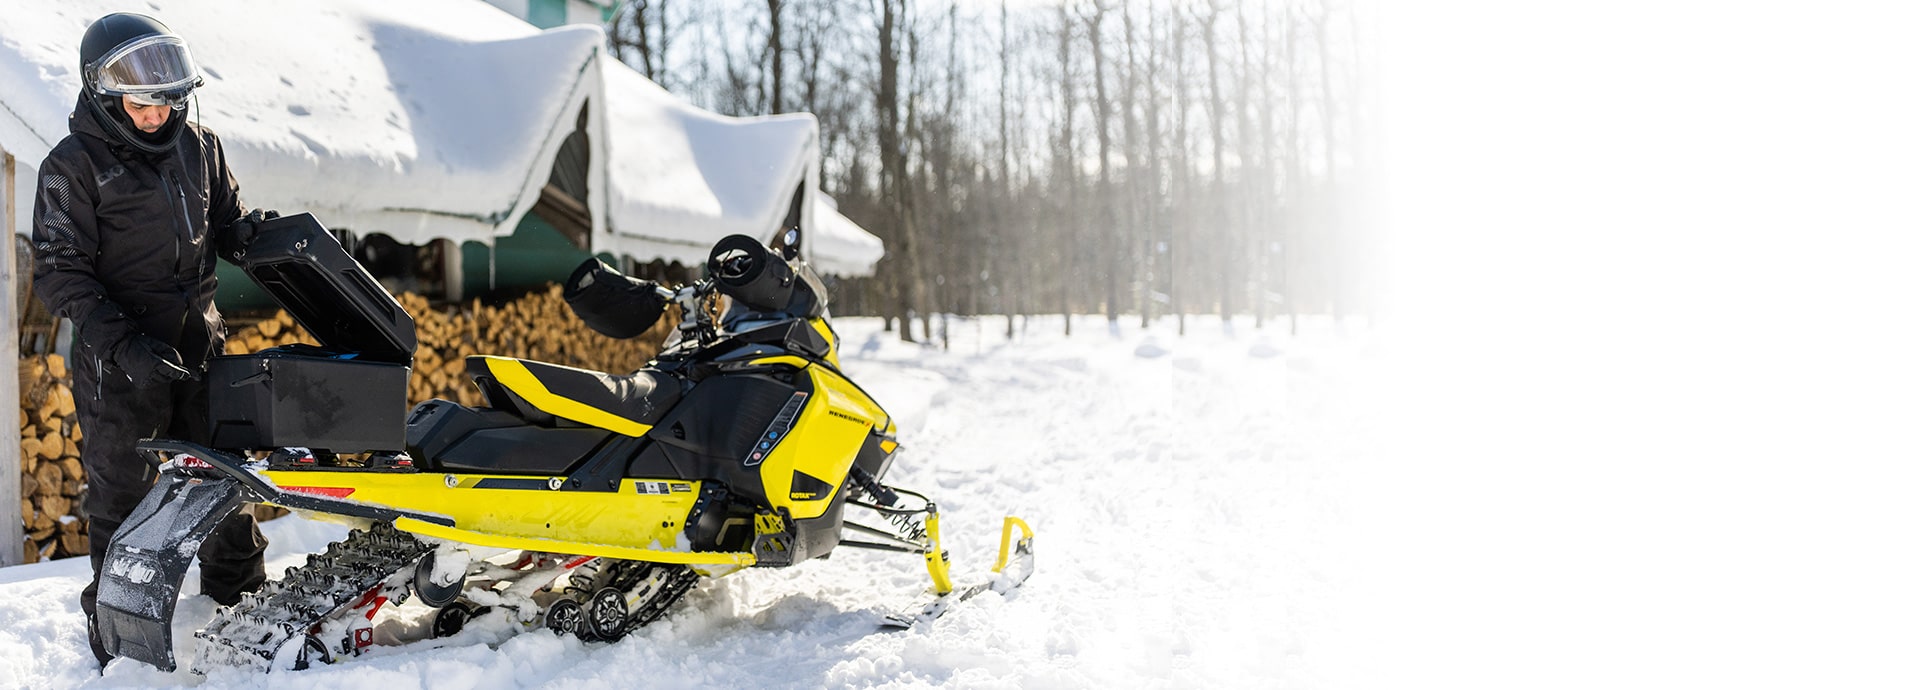 Kimpex Connect mounting bases for snowmobile accessories